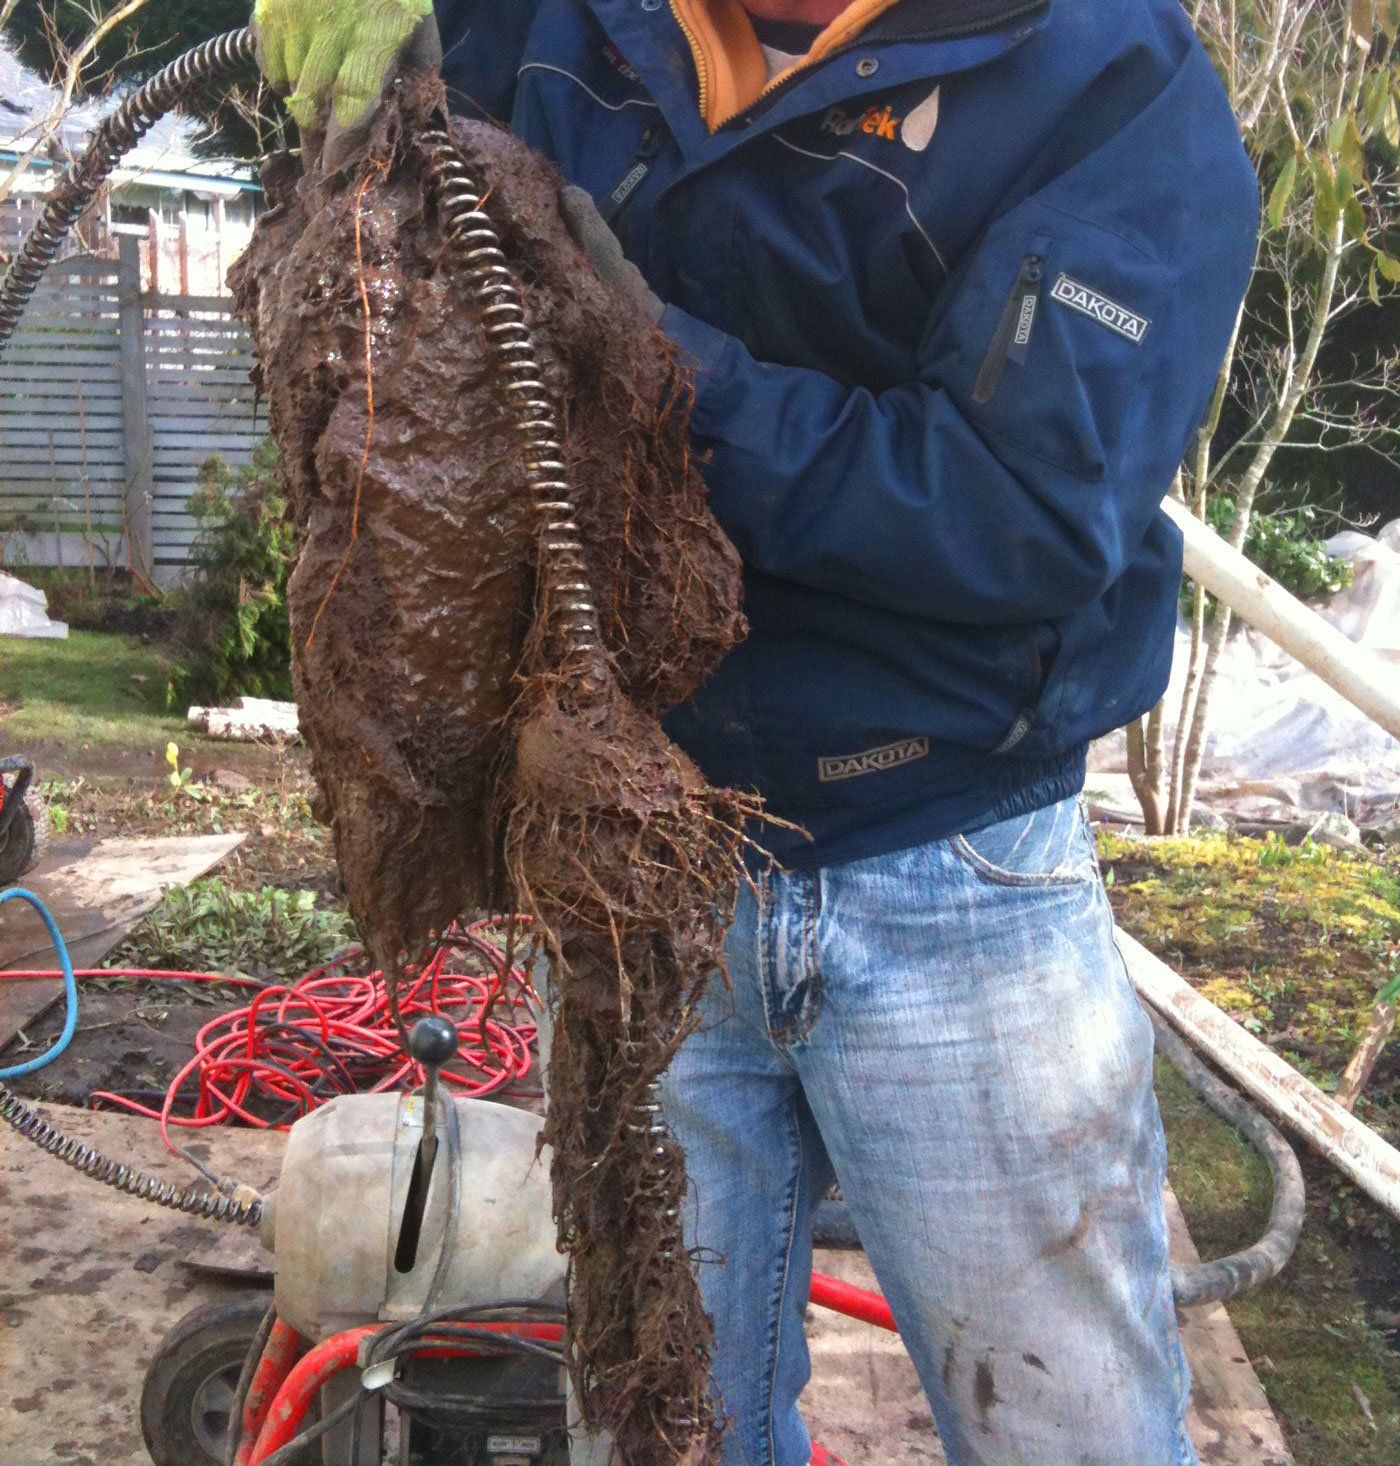 A drain plumber from RainTek holding up a rooter with tangled muck and tree roots in it after cleaning and unclogging a drain pipe